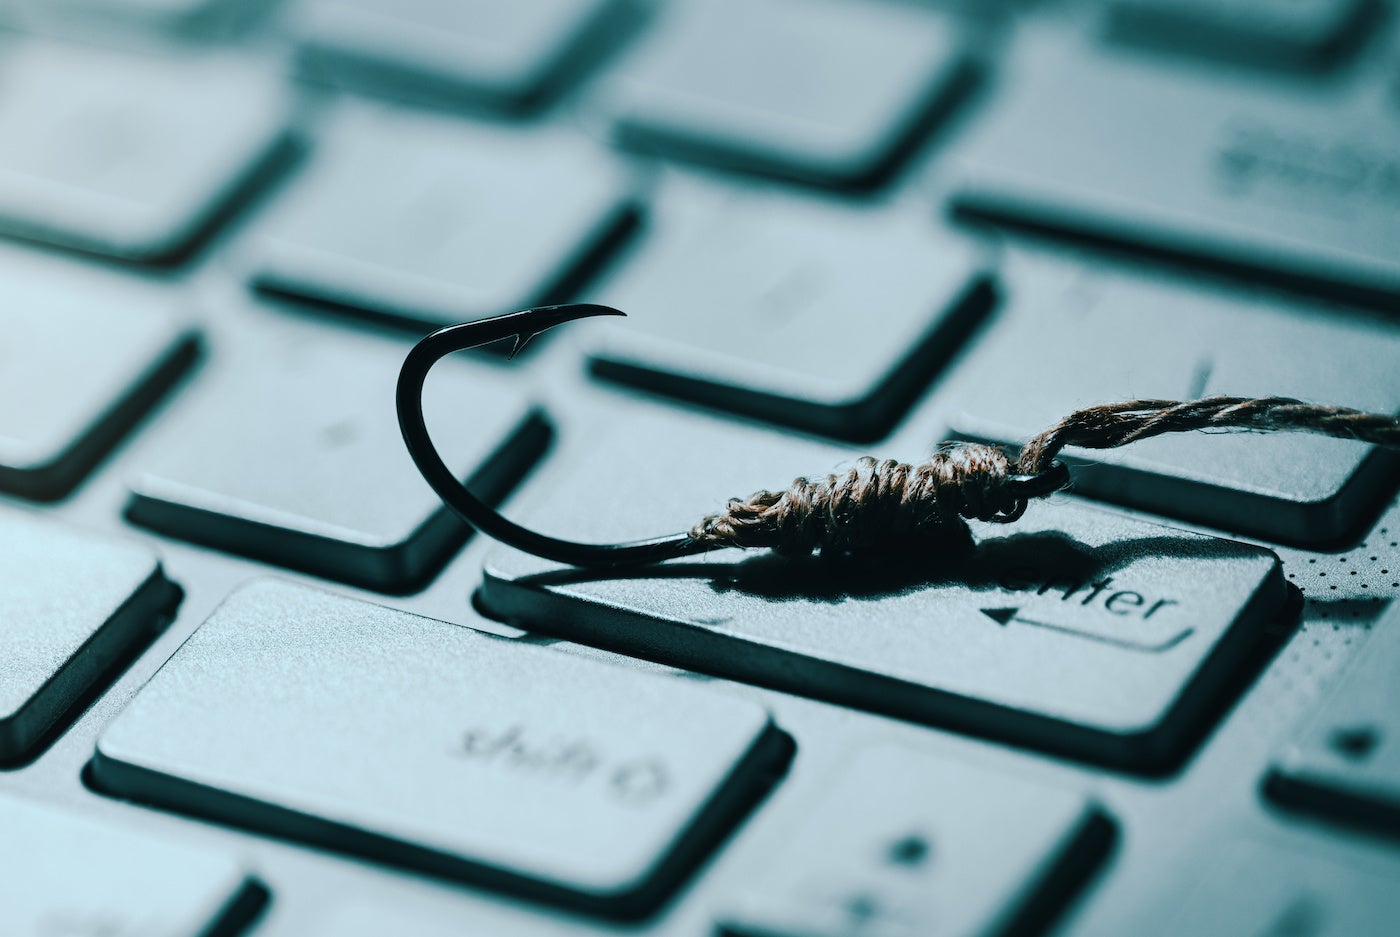 spear-phishing-vs-phishing:-what-are-the-main-differences?-–-source:-wwwtechrepublic.com